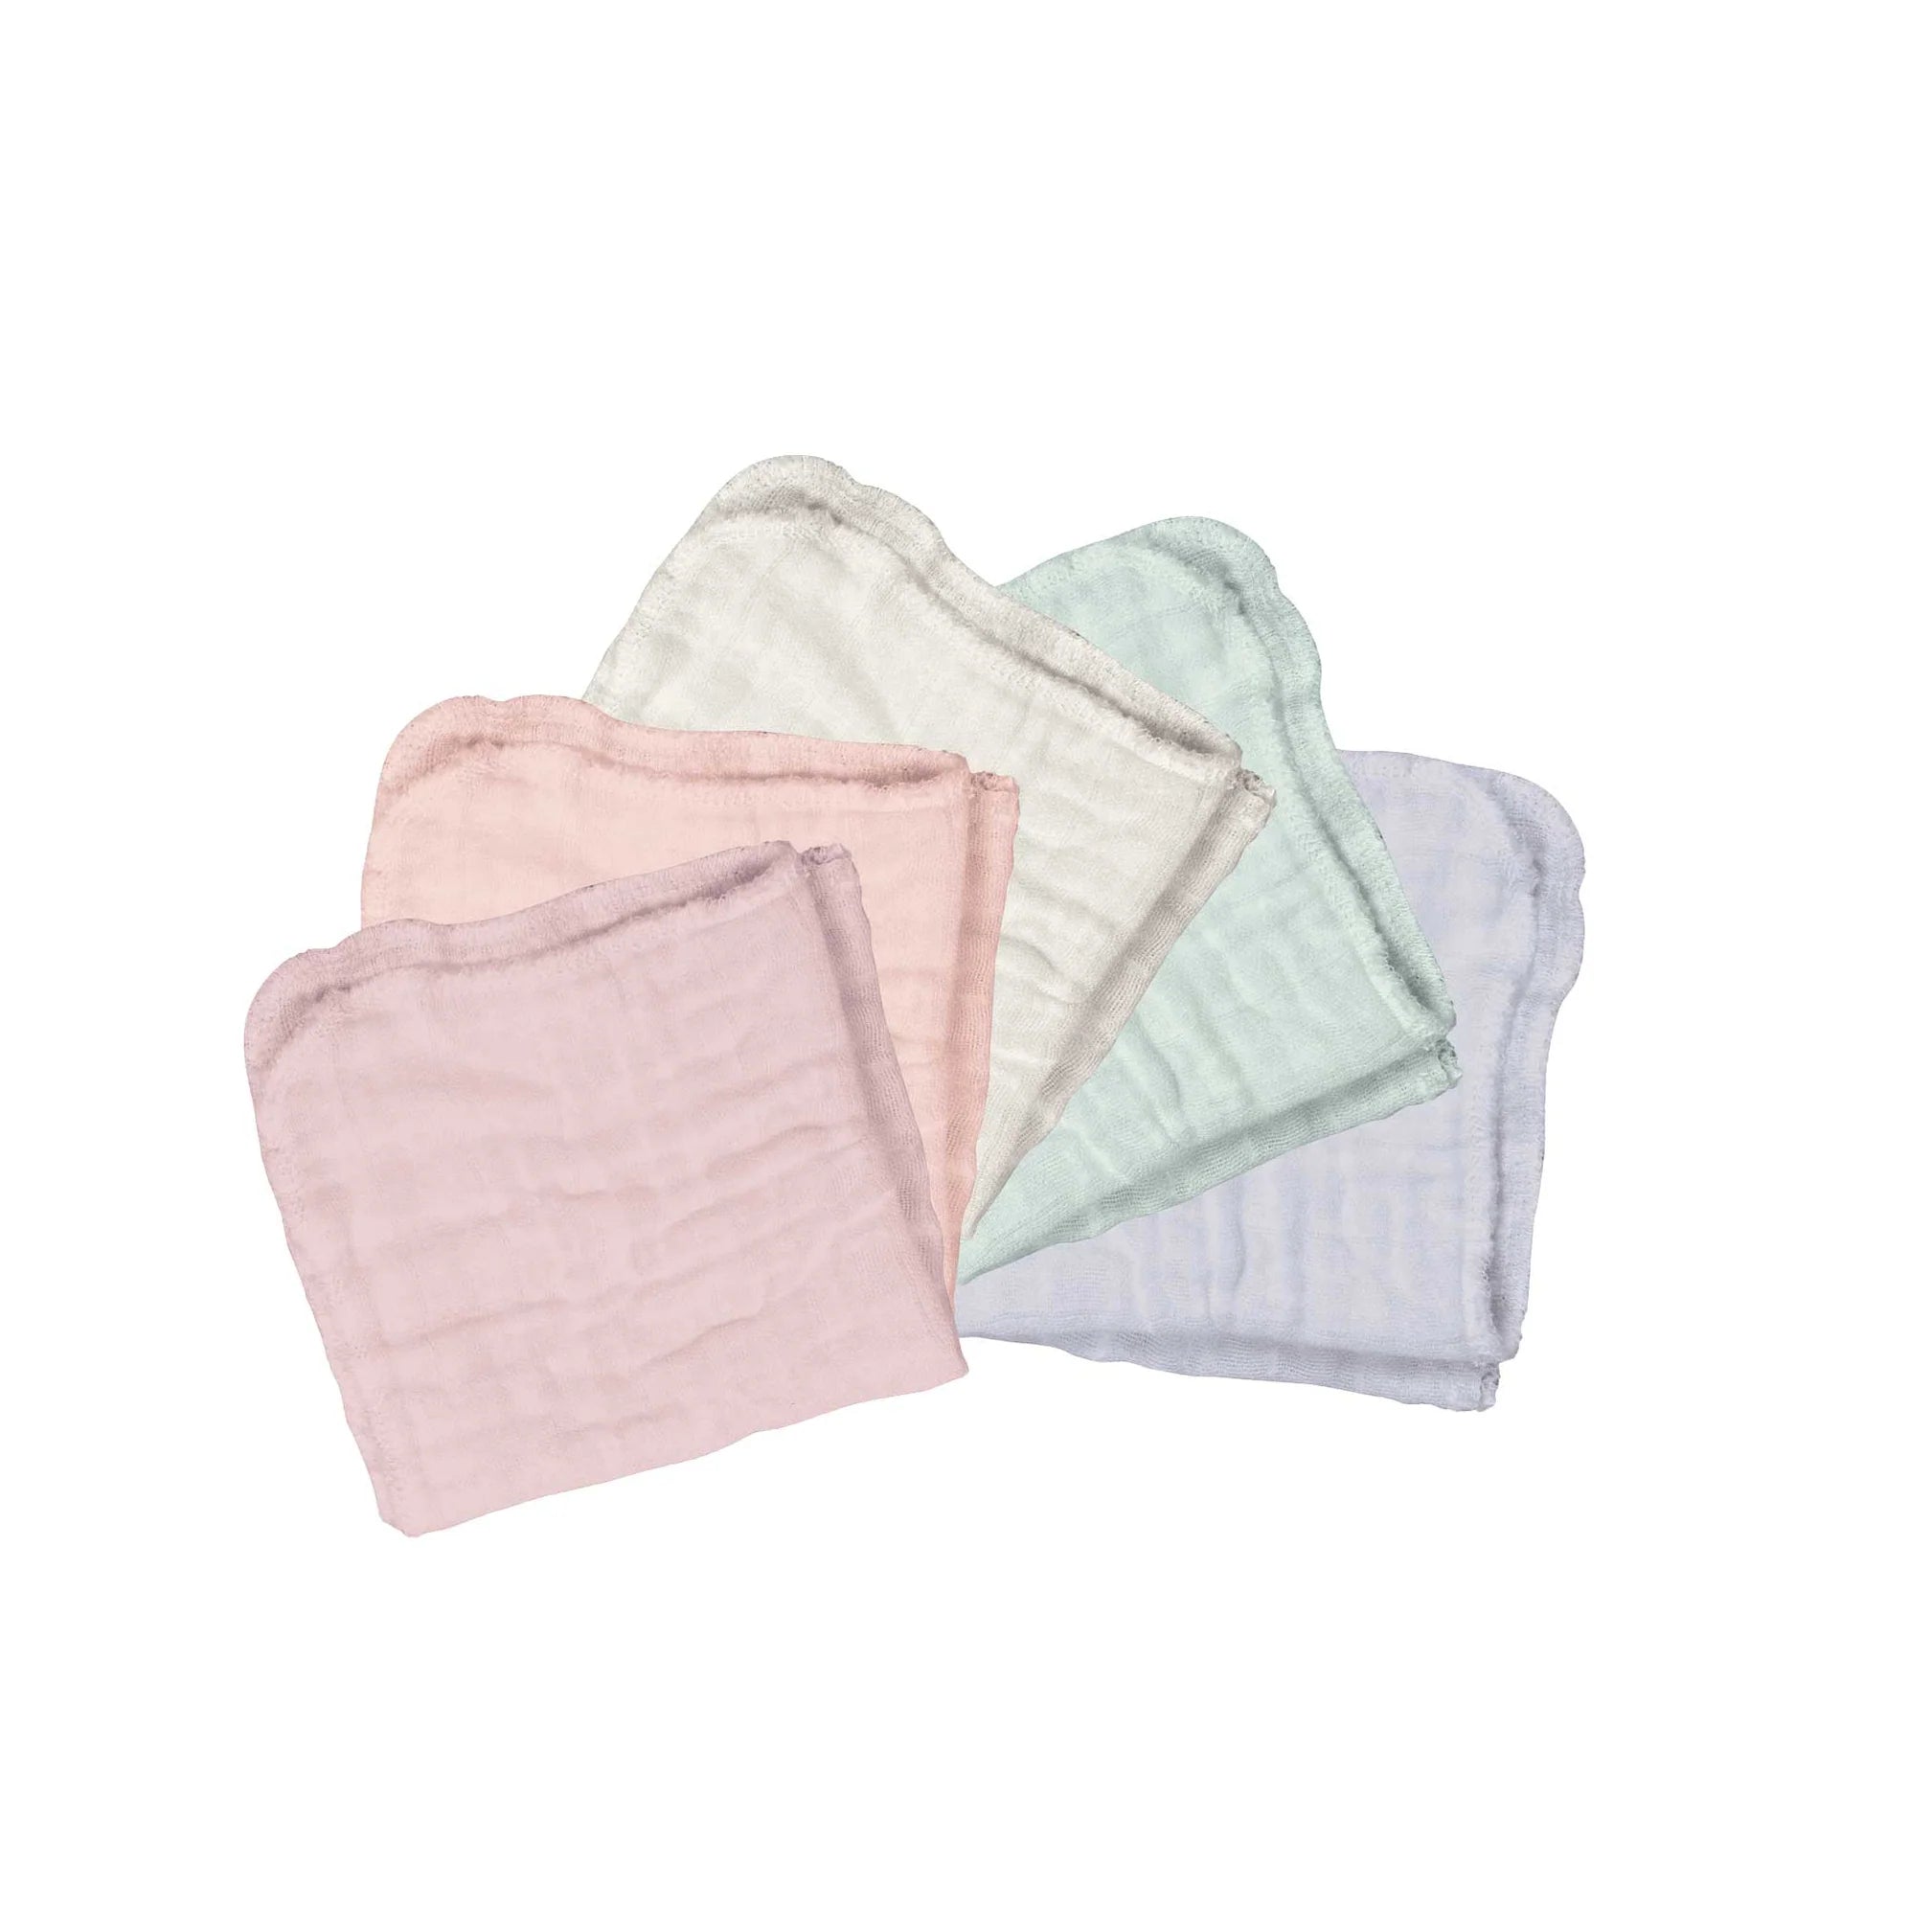 Green Sprouts Organic Cotton Muslin Cloths - Rose Set - 5 Pack